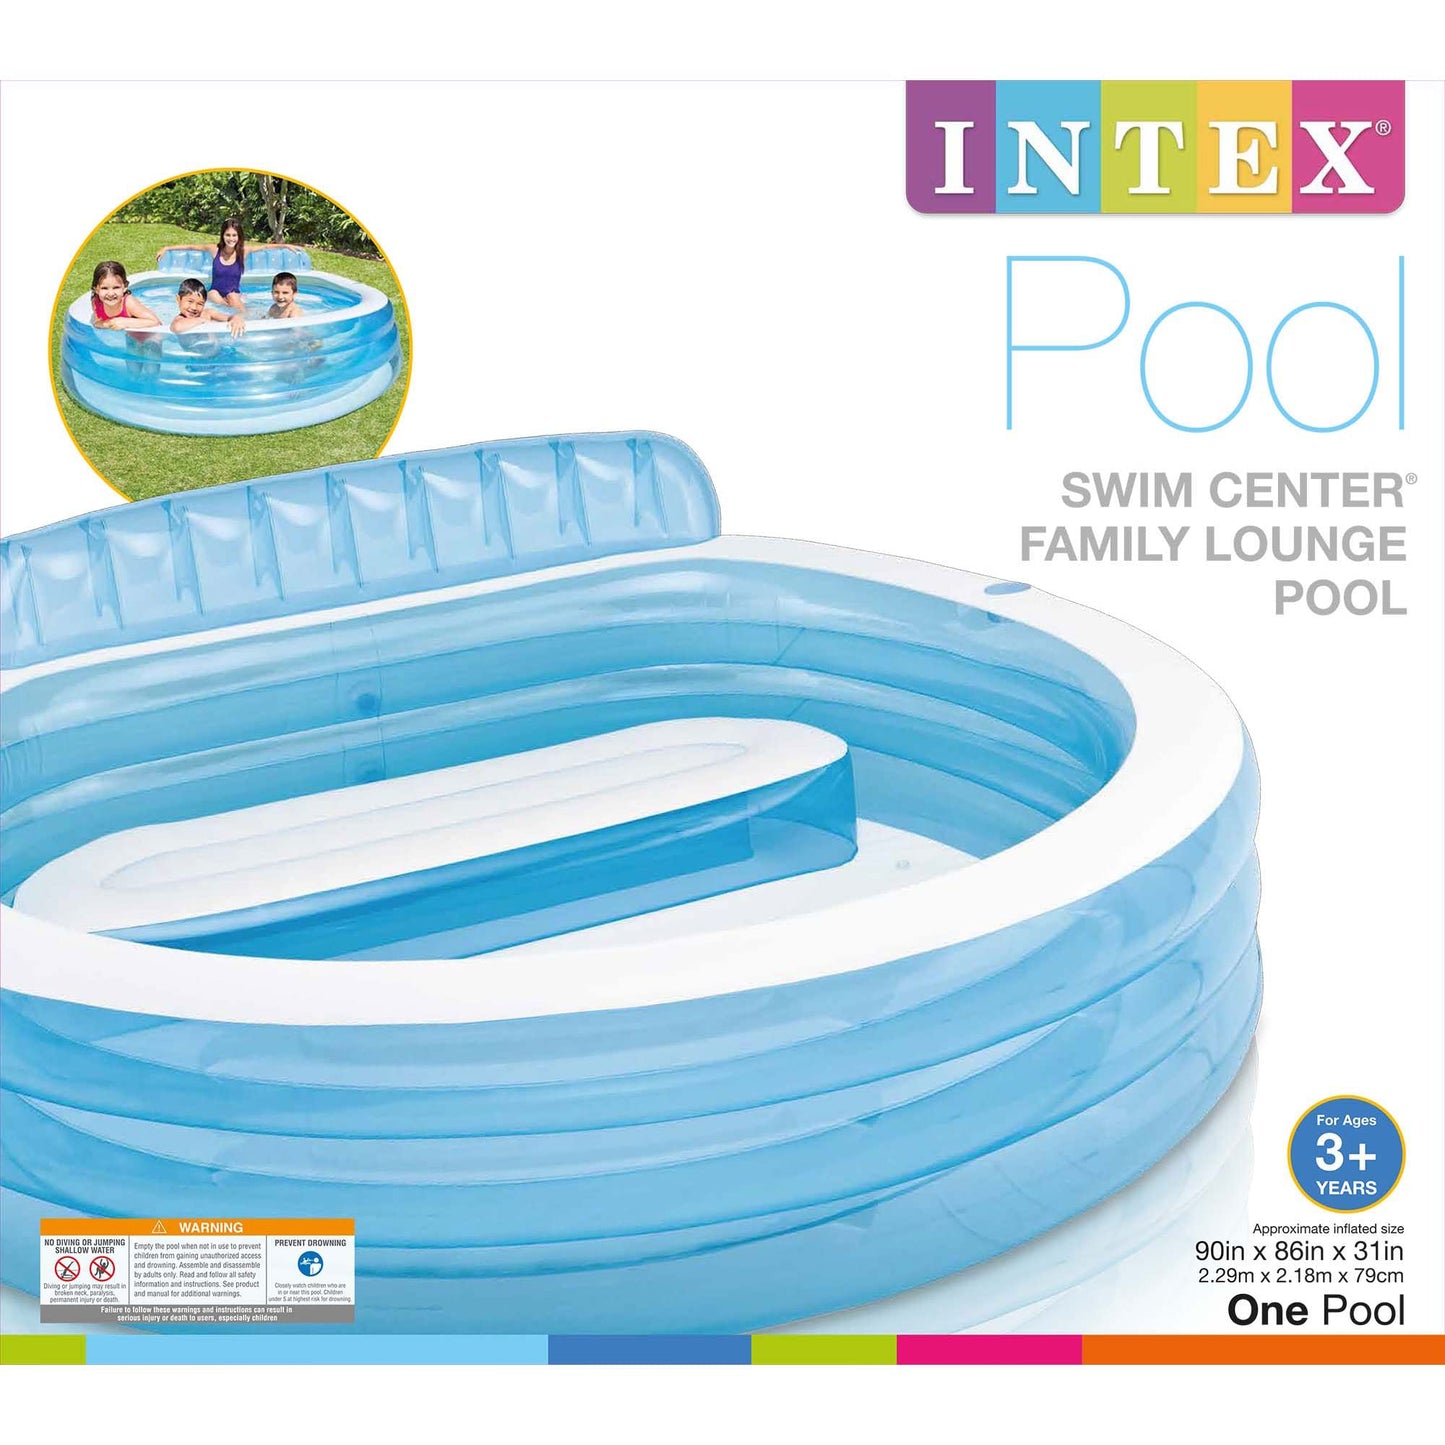 Intex Swim Center Inflatable Family Lounge Pool with Built In Bench, Cup Holder, and 2 Air Chambers for Pre Kindergarten Toys and Outdoor Use, Blue